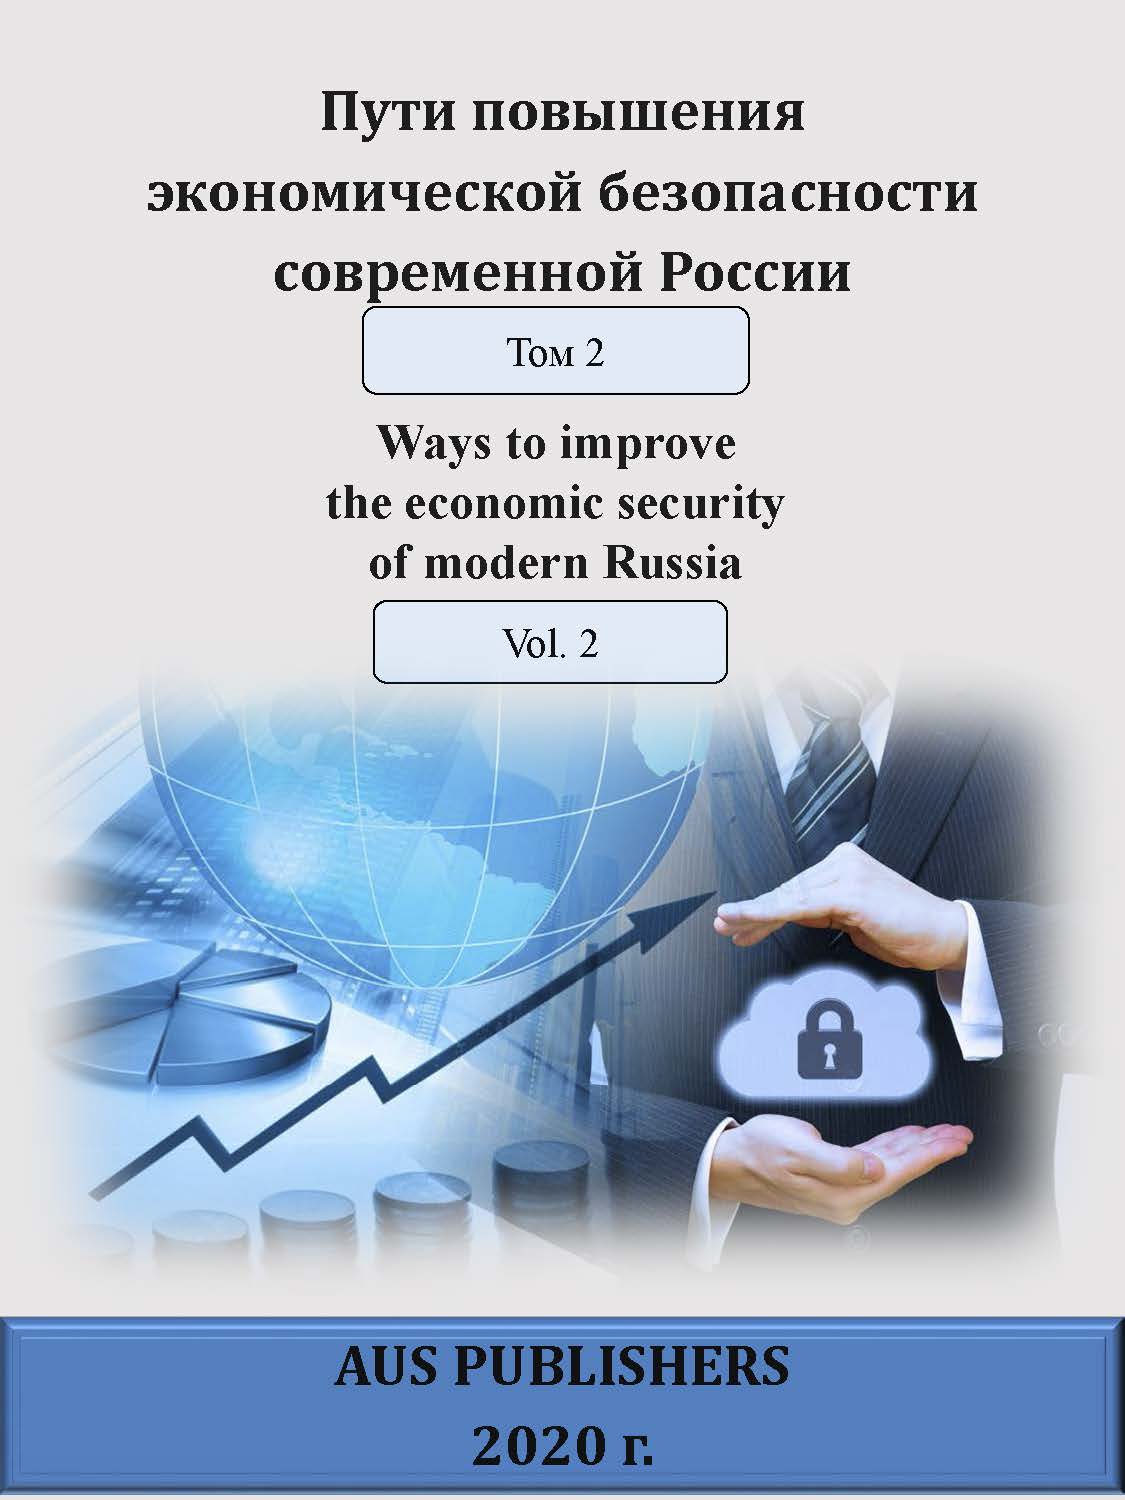                         RUSSIA'S PARTICIPATION IN THE GLOBAL INVESTMENT PROCESS
            